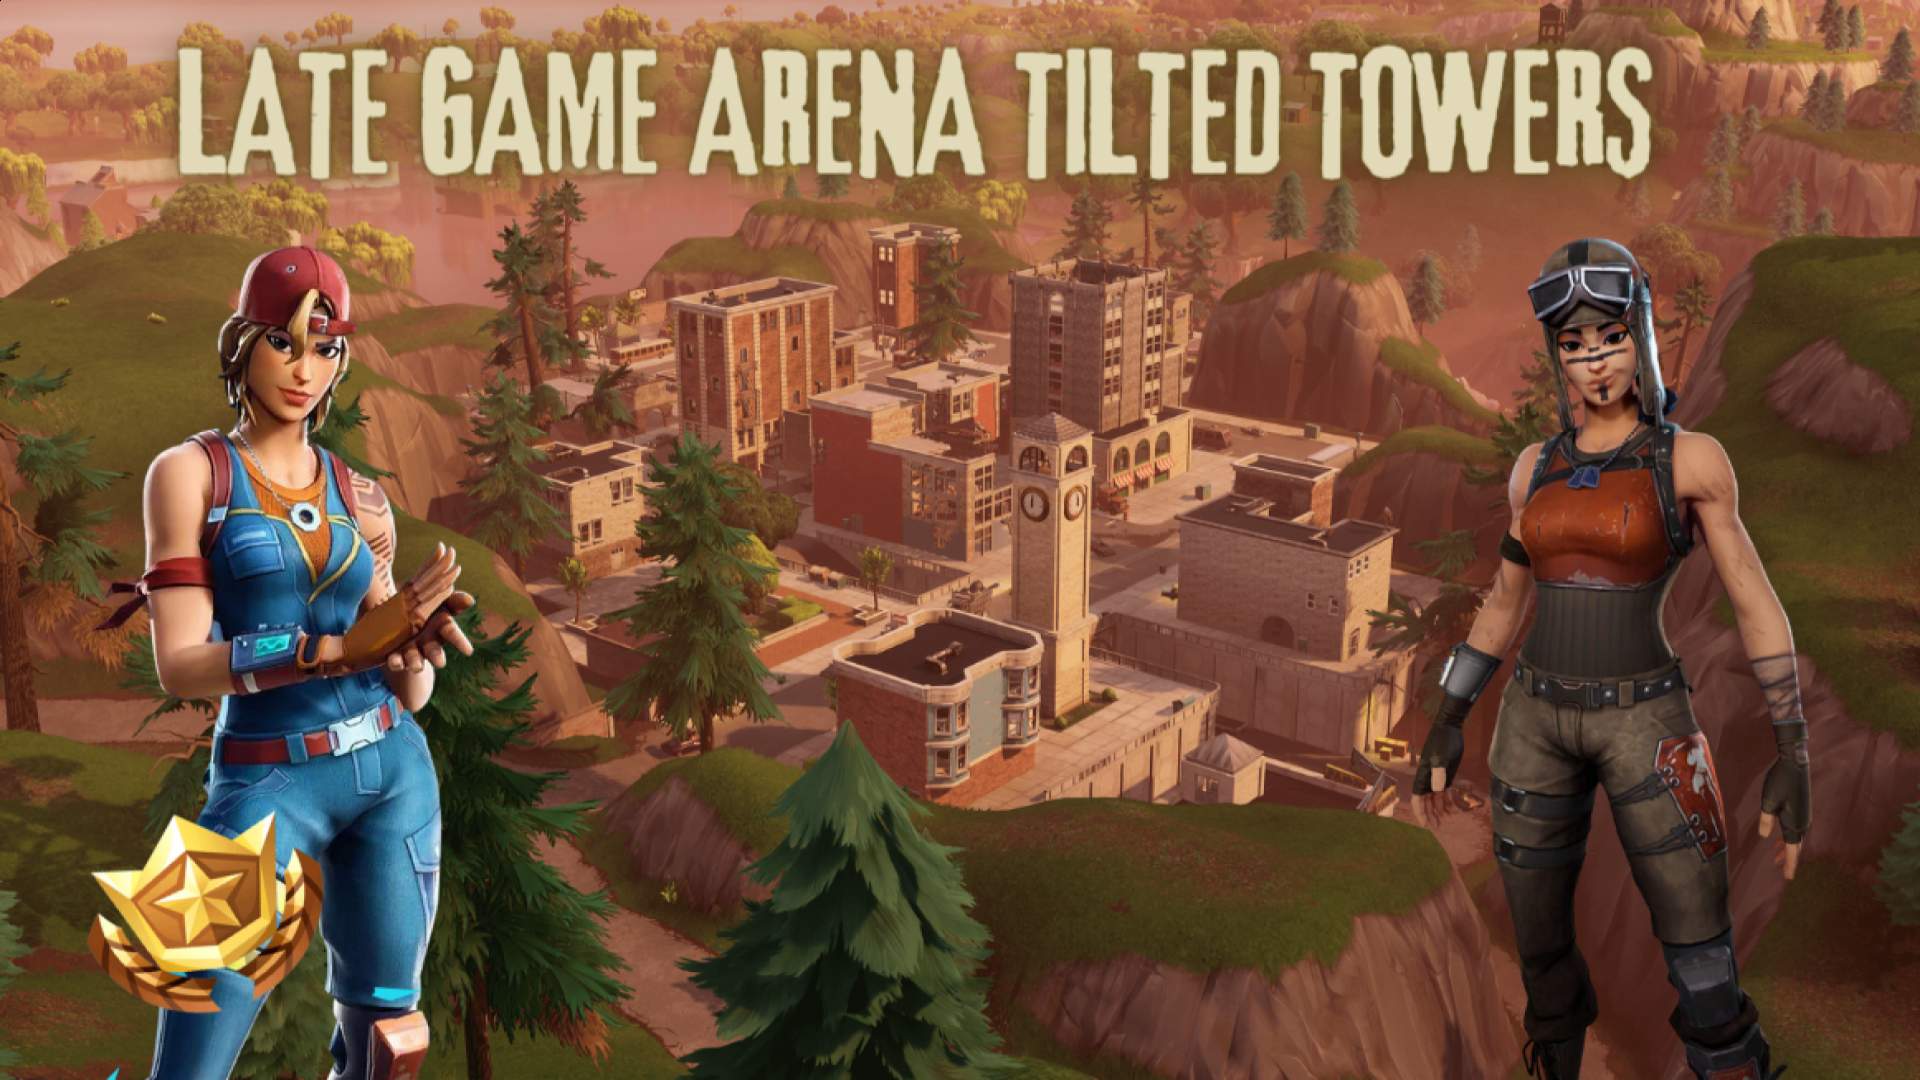 LATE GAME ARENA TILTED TOWERS